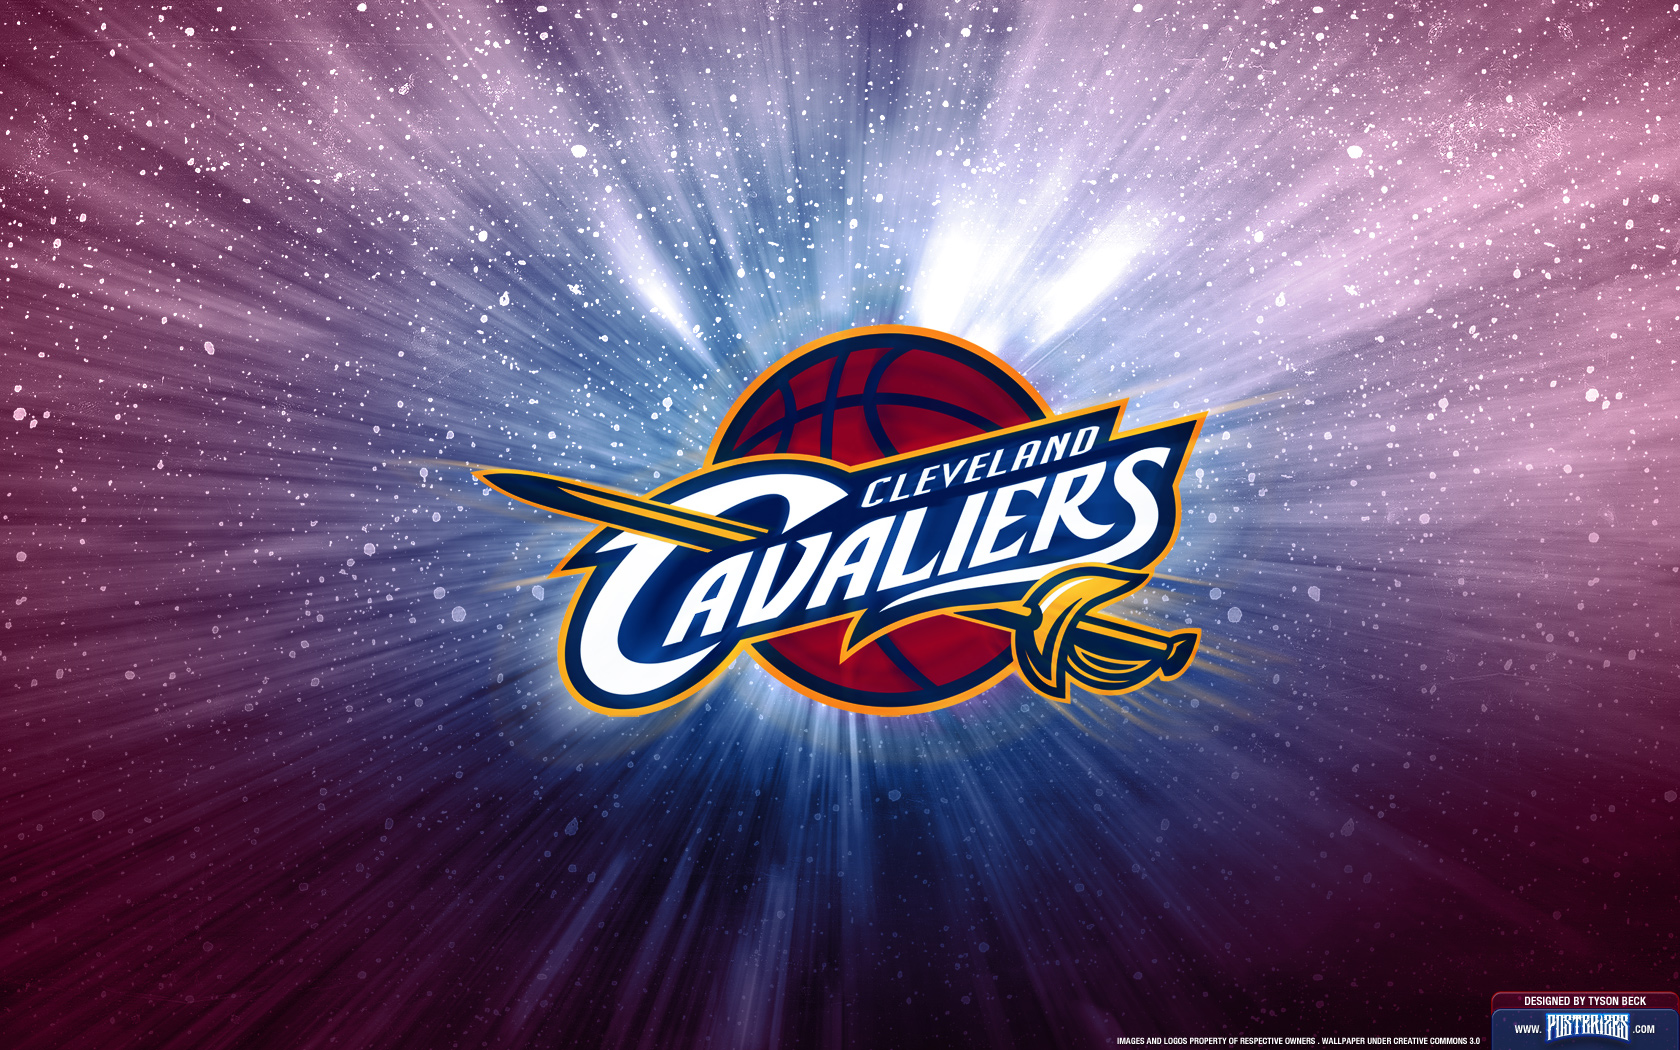 Cleveland Cavaliers NBA iPhone XXS11Android Lock Screen Wallpaper  a  photo on Flickriver